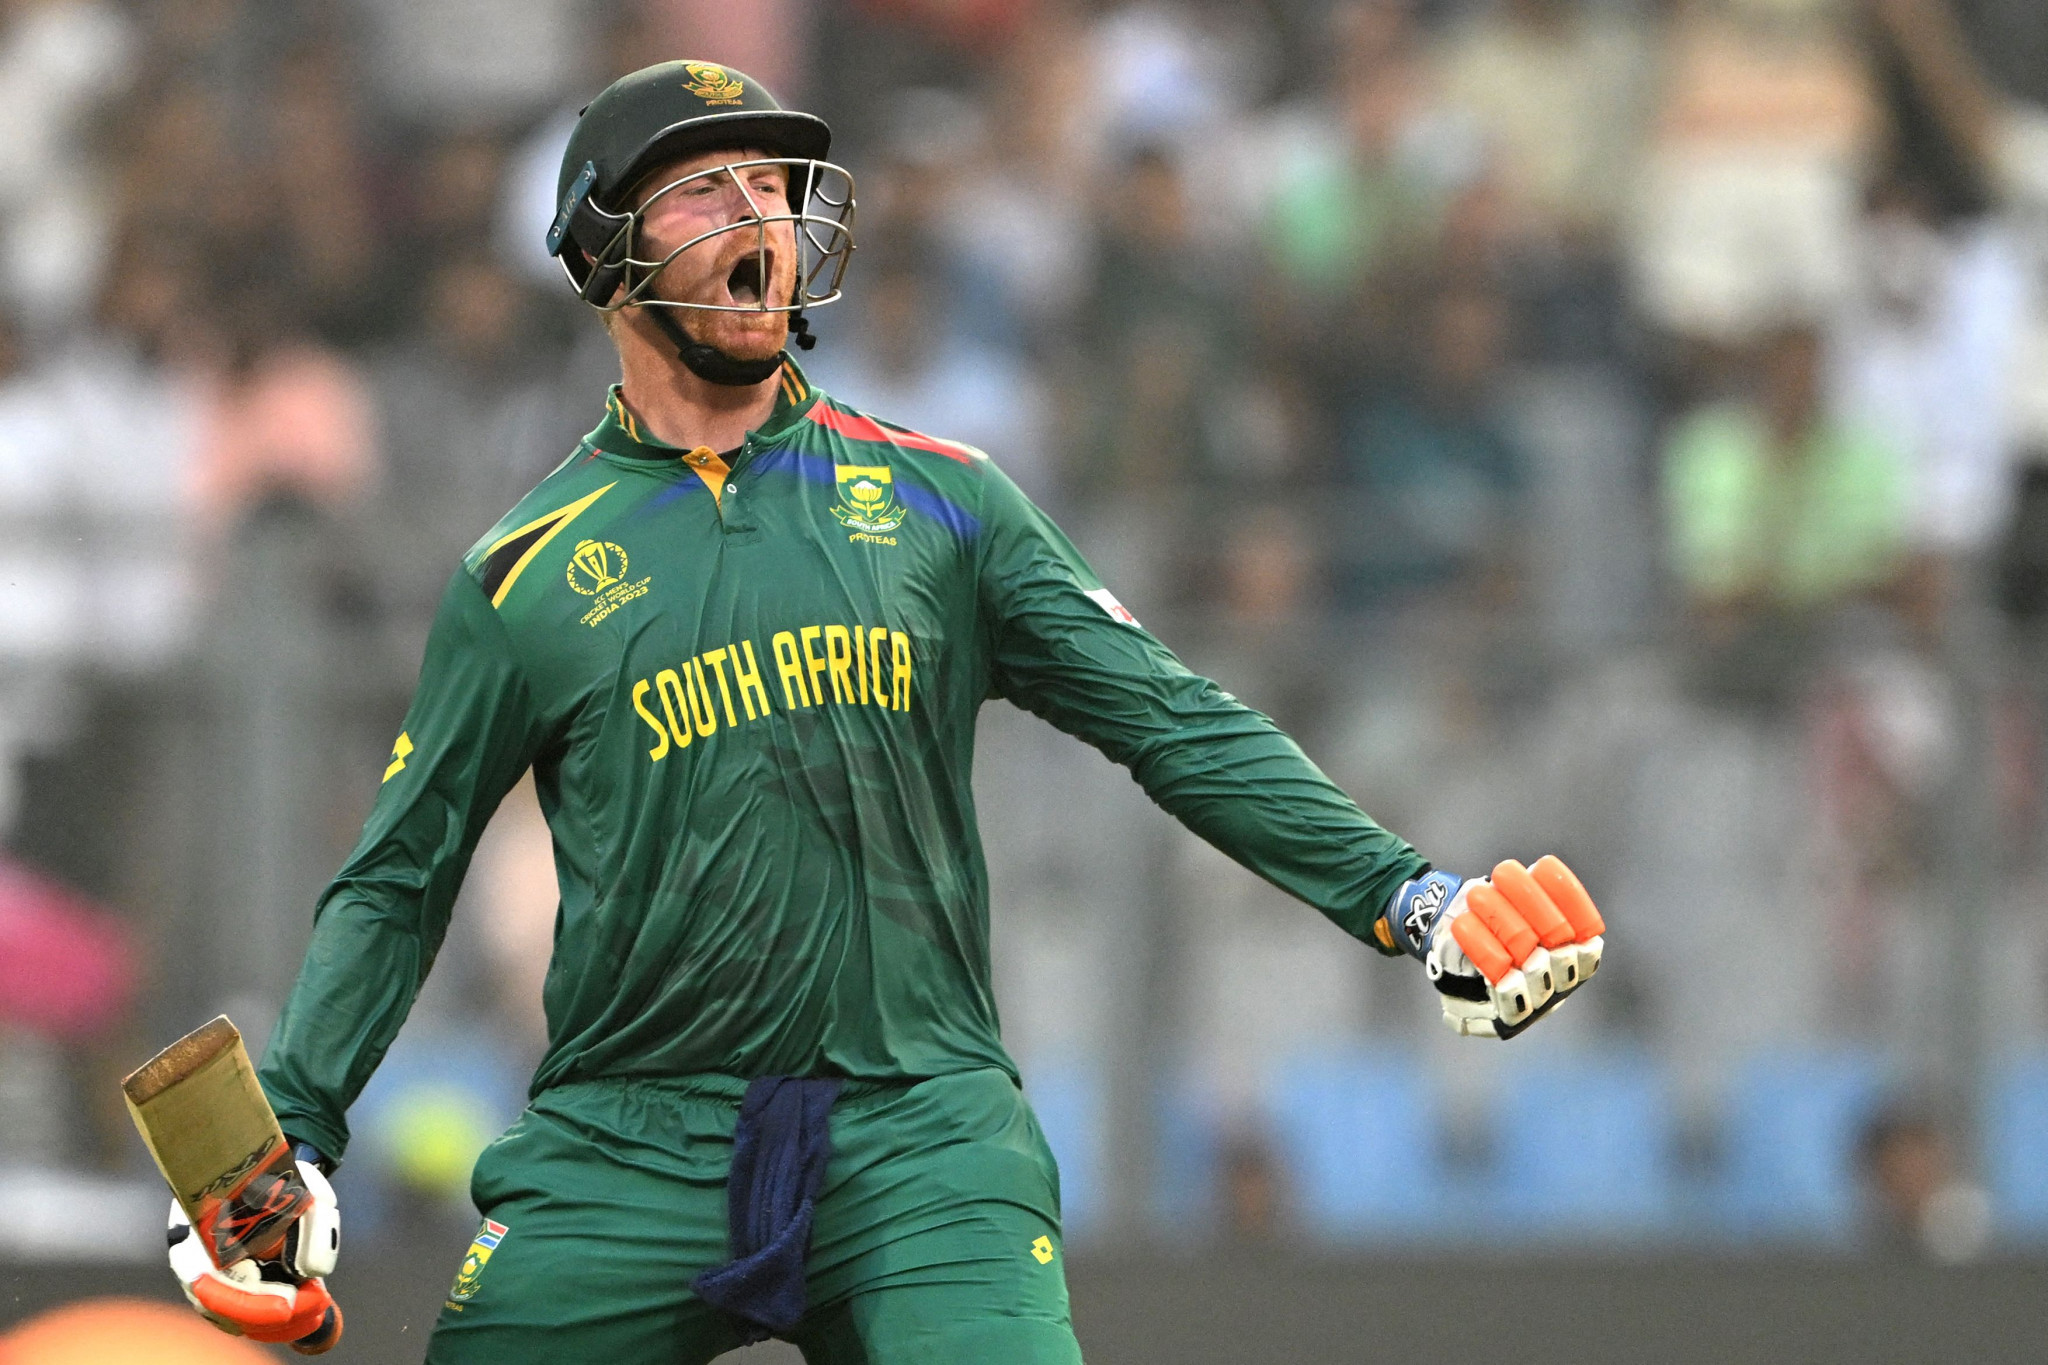 Heinrich Klaasen led South Africa to a crucial victory over defending champions England with 109 runs ©Getty Images